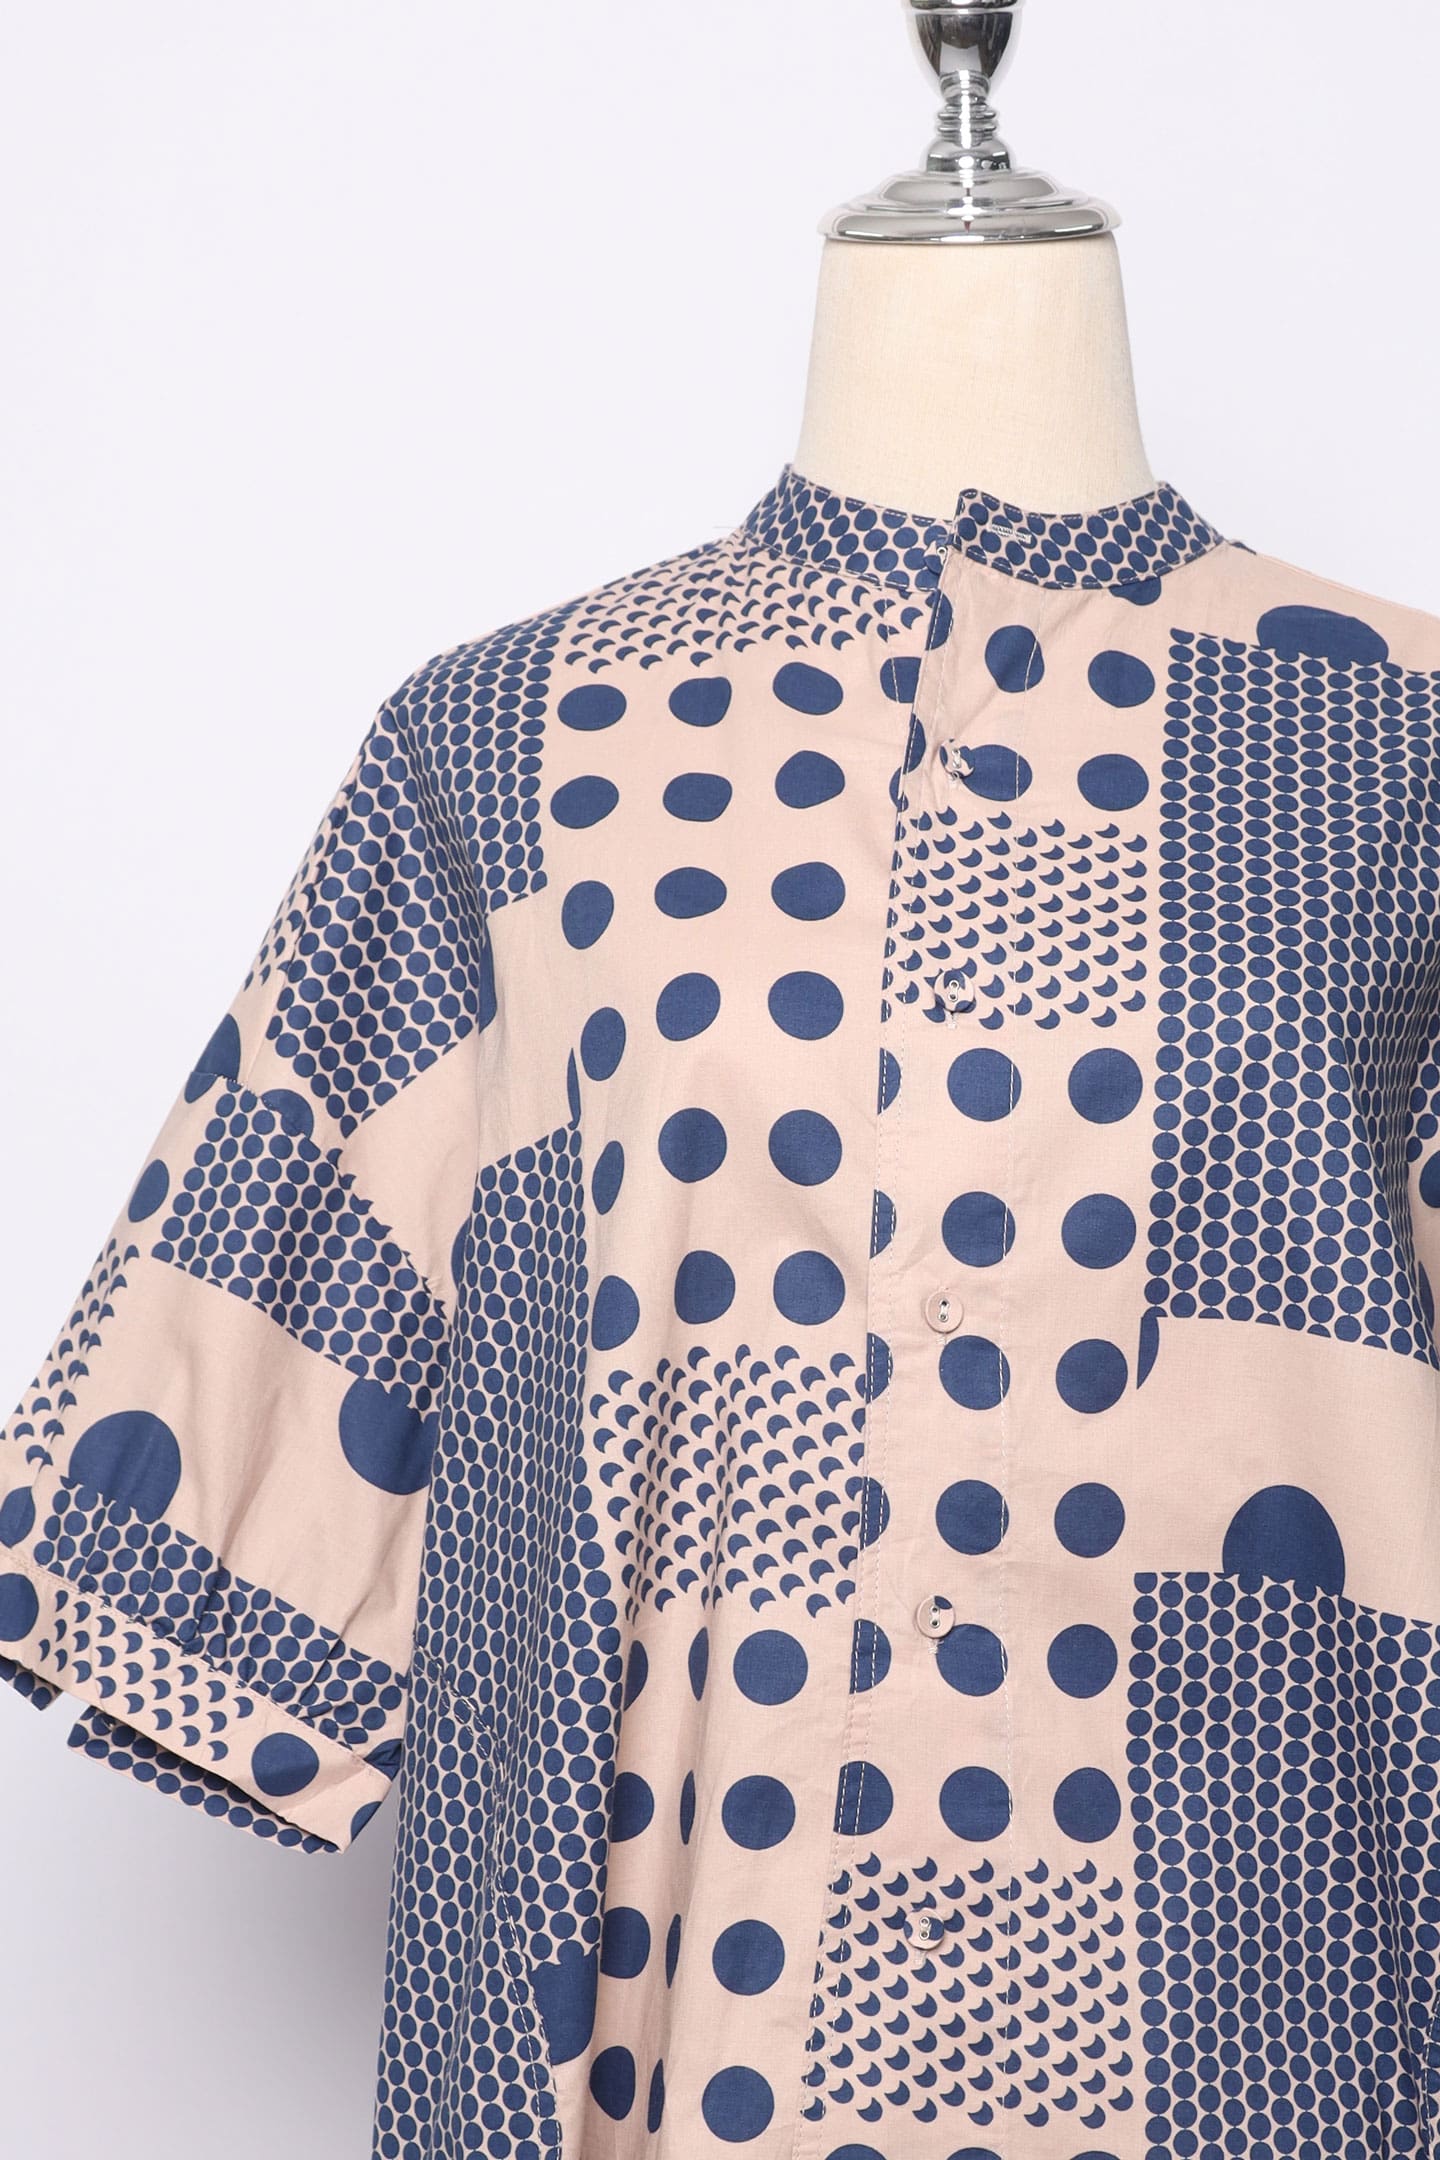 PO - Liam Top in Pattern Dots